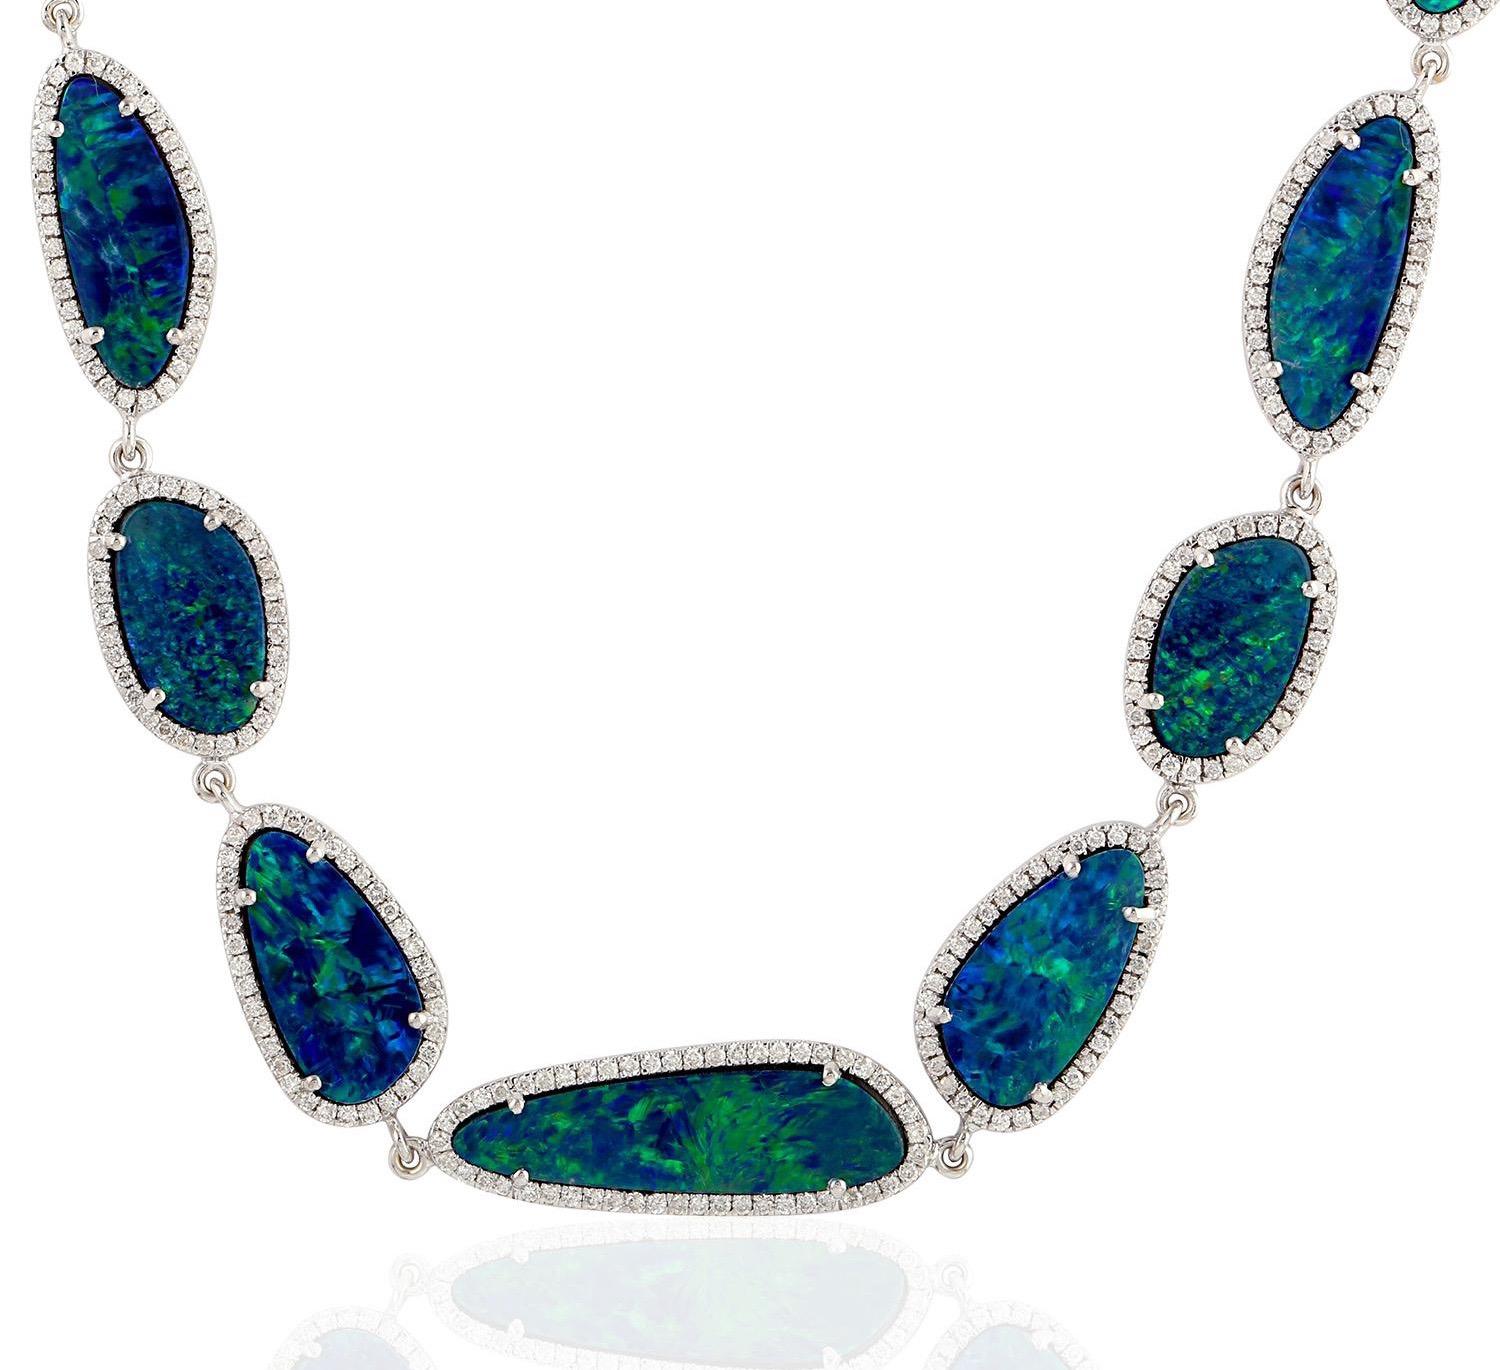 Oval Cut 30.32 Carat Opal Diamond 18 Karat White Gold Necklace One of a Kind For Sale